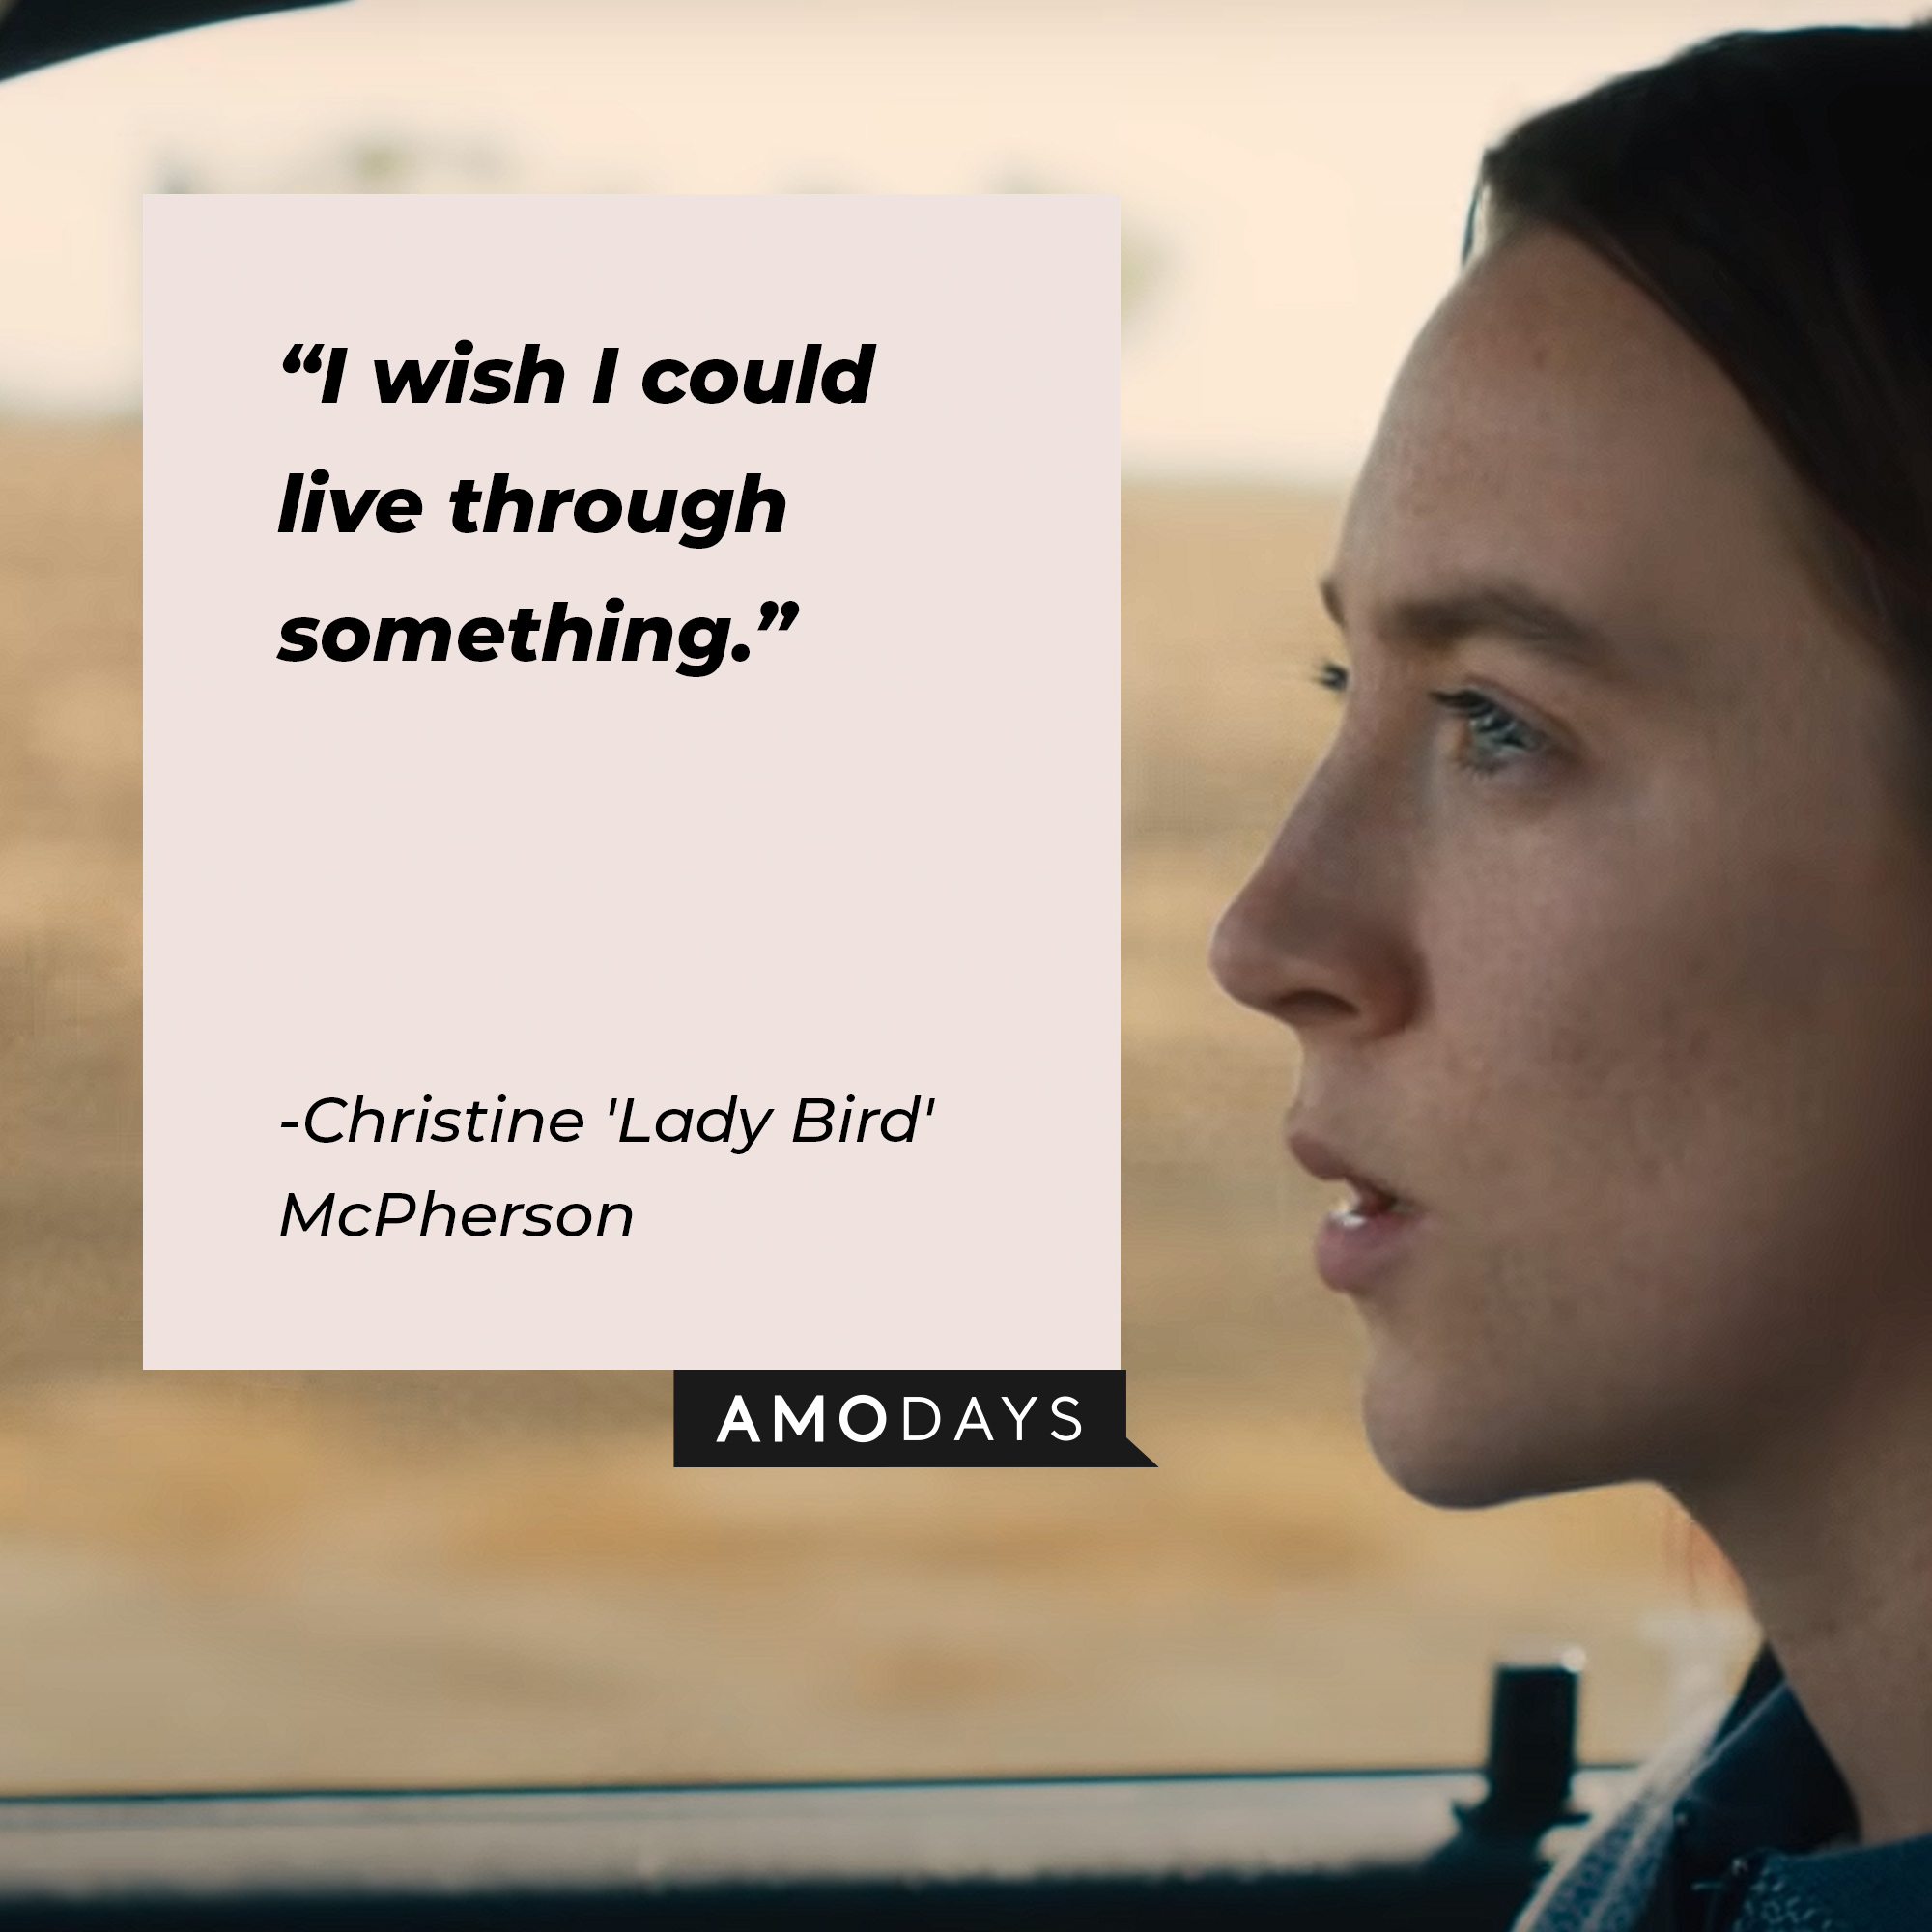 Christine 'Lady Bird' McPherson's quote: "I wish I could live through something." | Source: youtube.com/A24